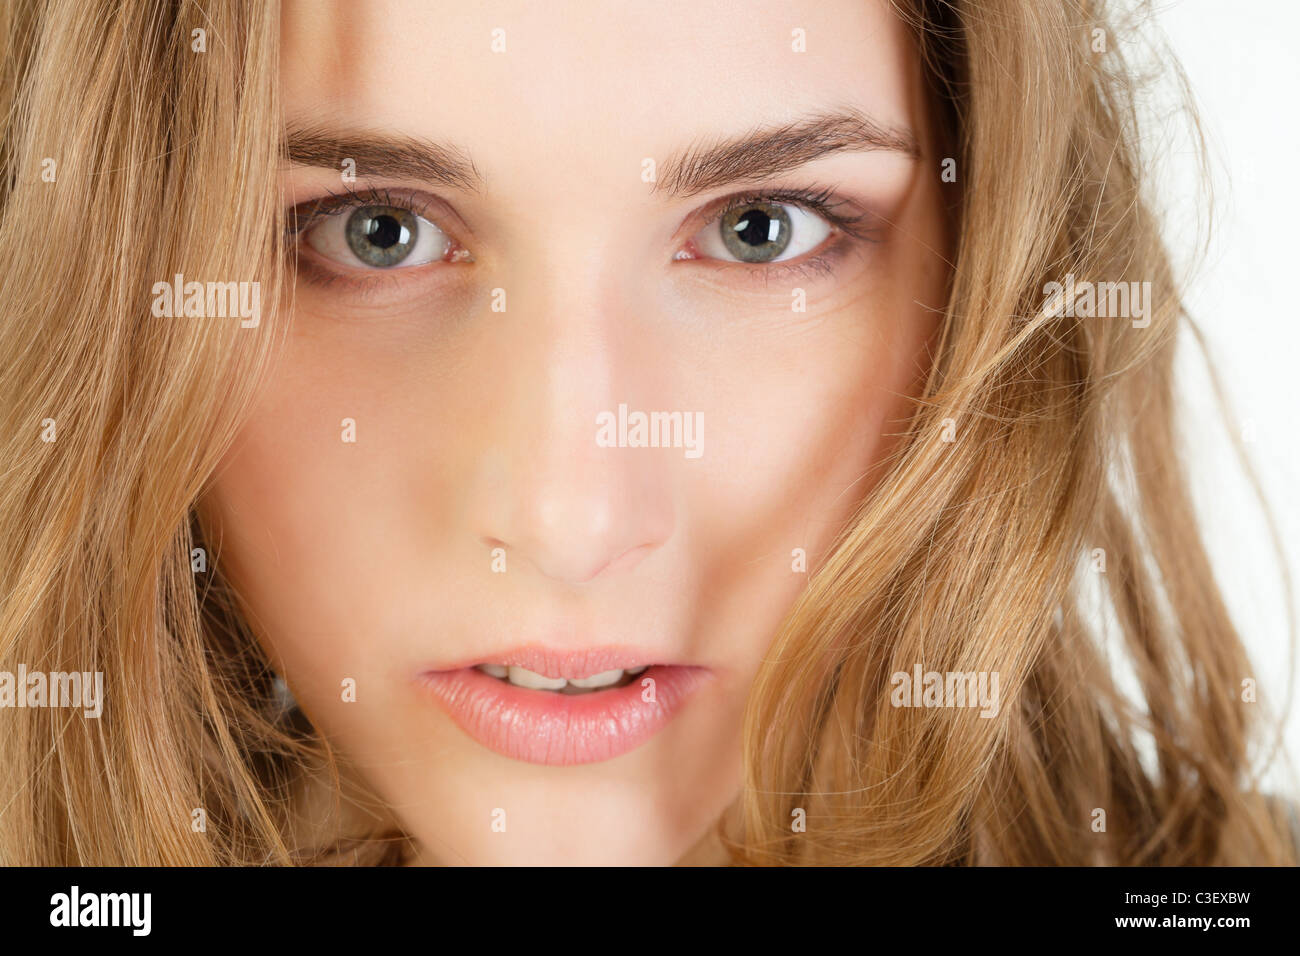 Close-up portrait of pretty young woman with long blond hair Stock Photo